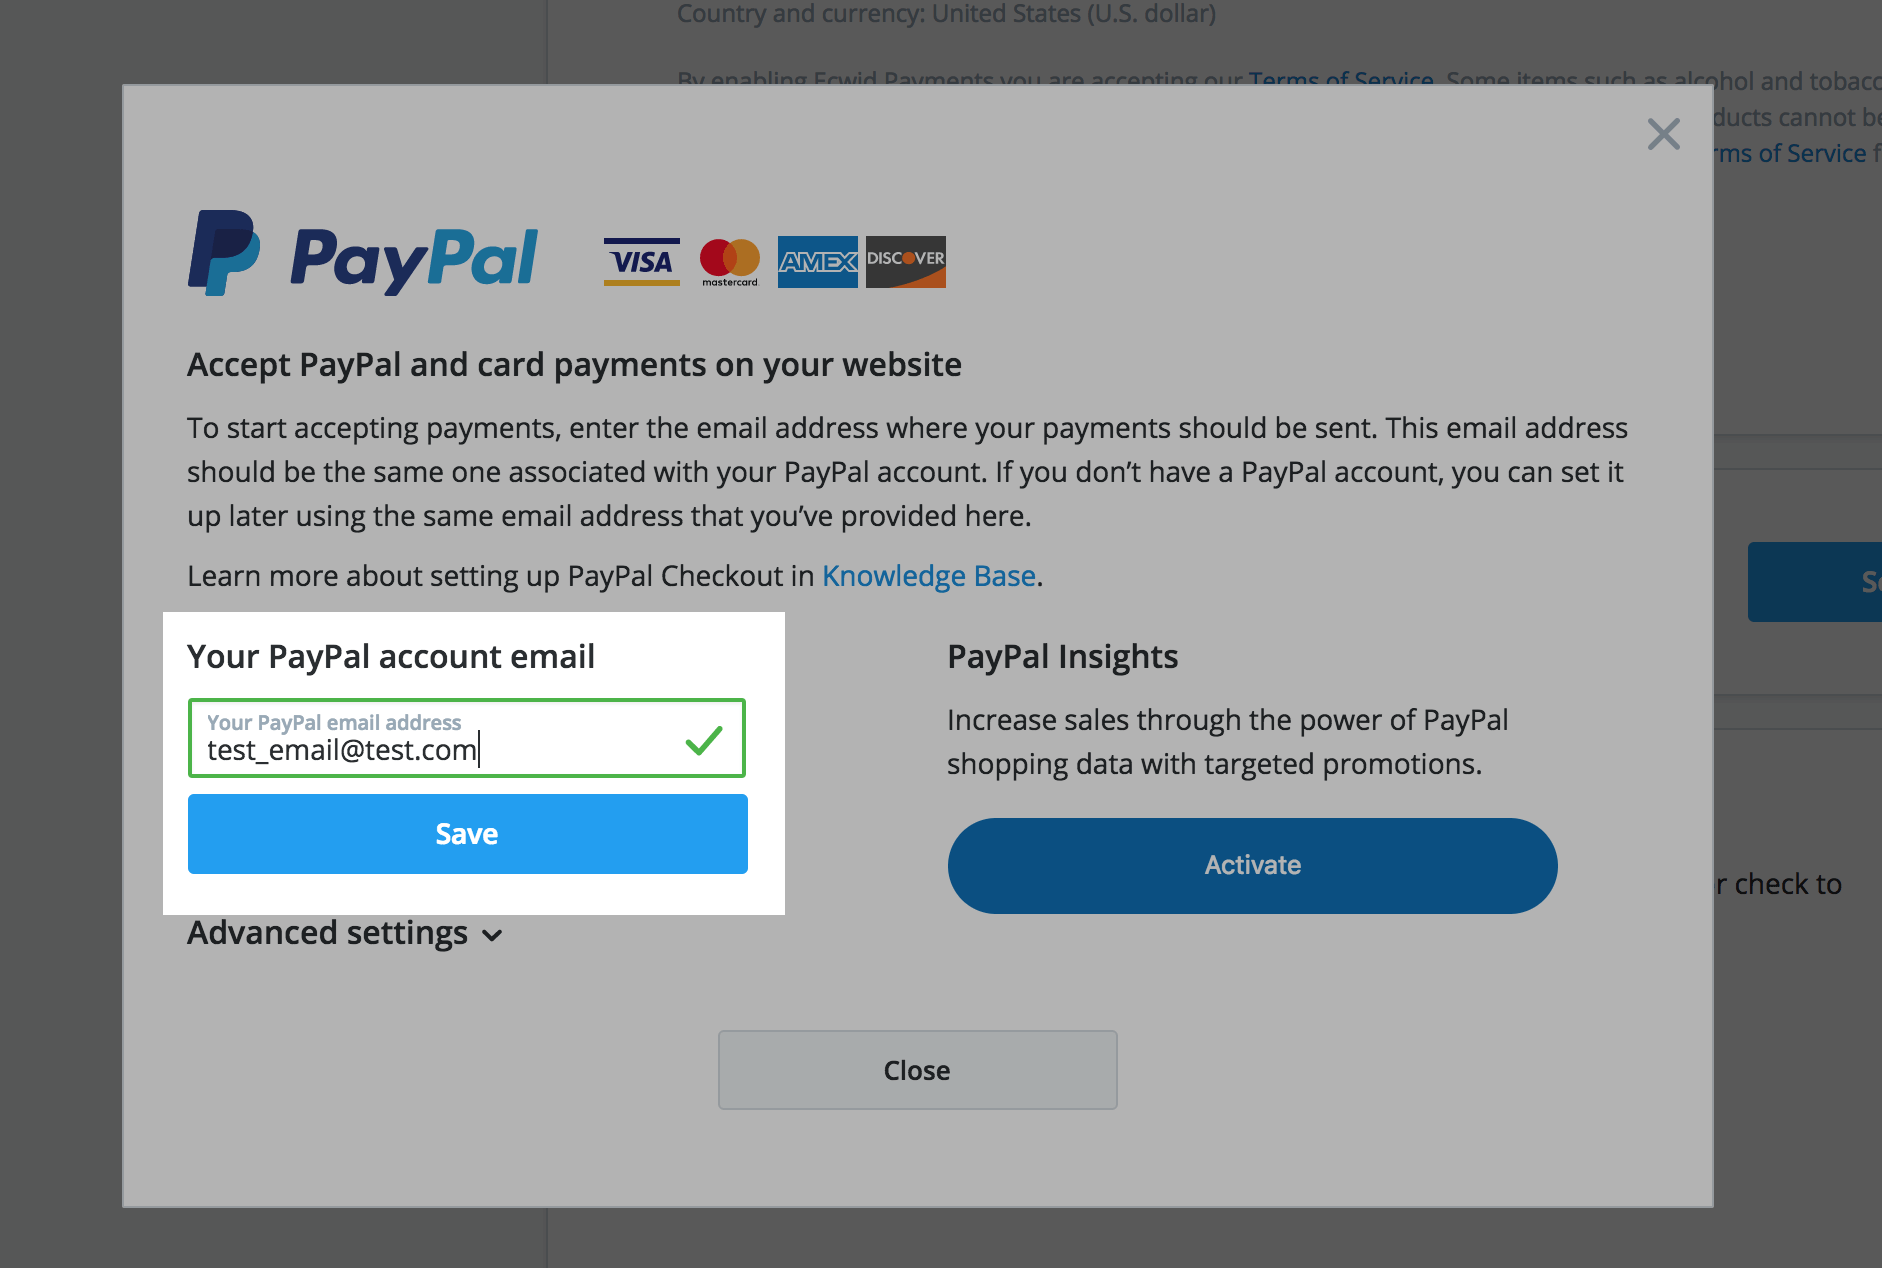 confirm my email paypal